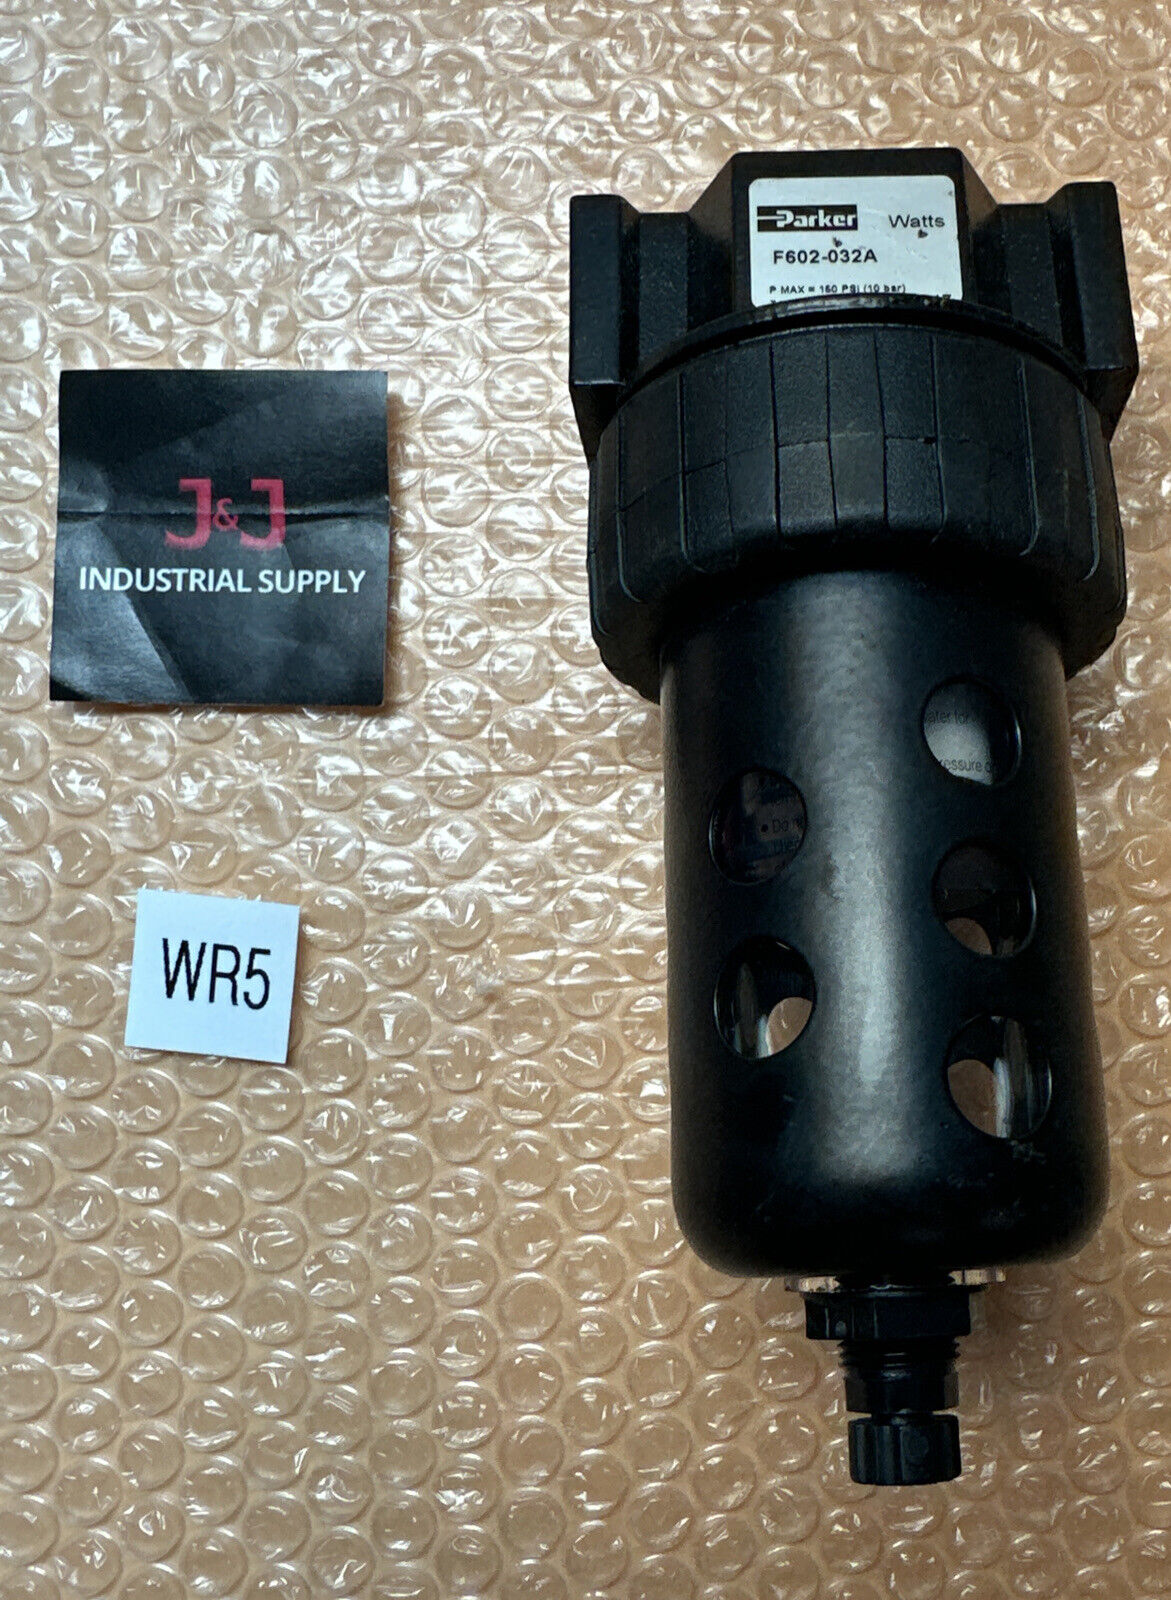 NEW- Parker Watts F602-032A Pneumatic Filter Hi-Flow 150PSI 125°F || FASTSHIPPED